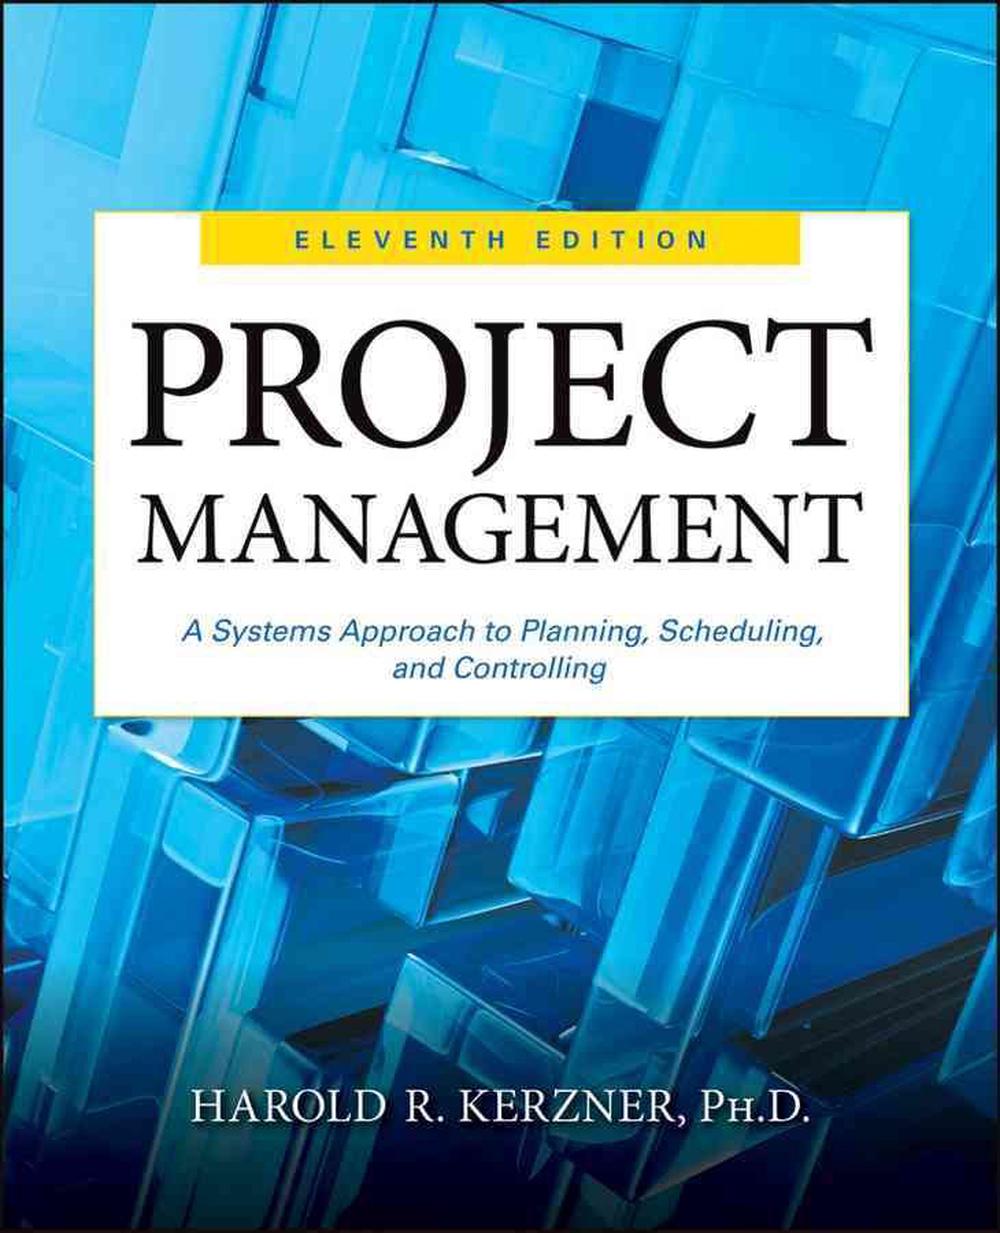 Project Management, 11th Edition by Harold R. Kerzner, Hardcover, 9781118022276 Buy online at